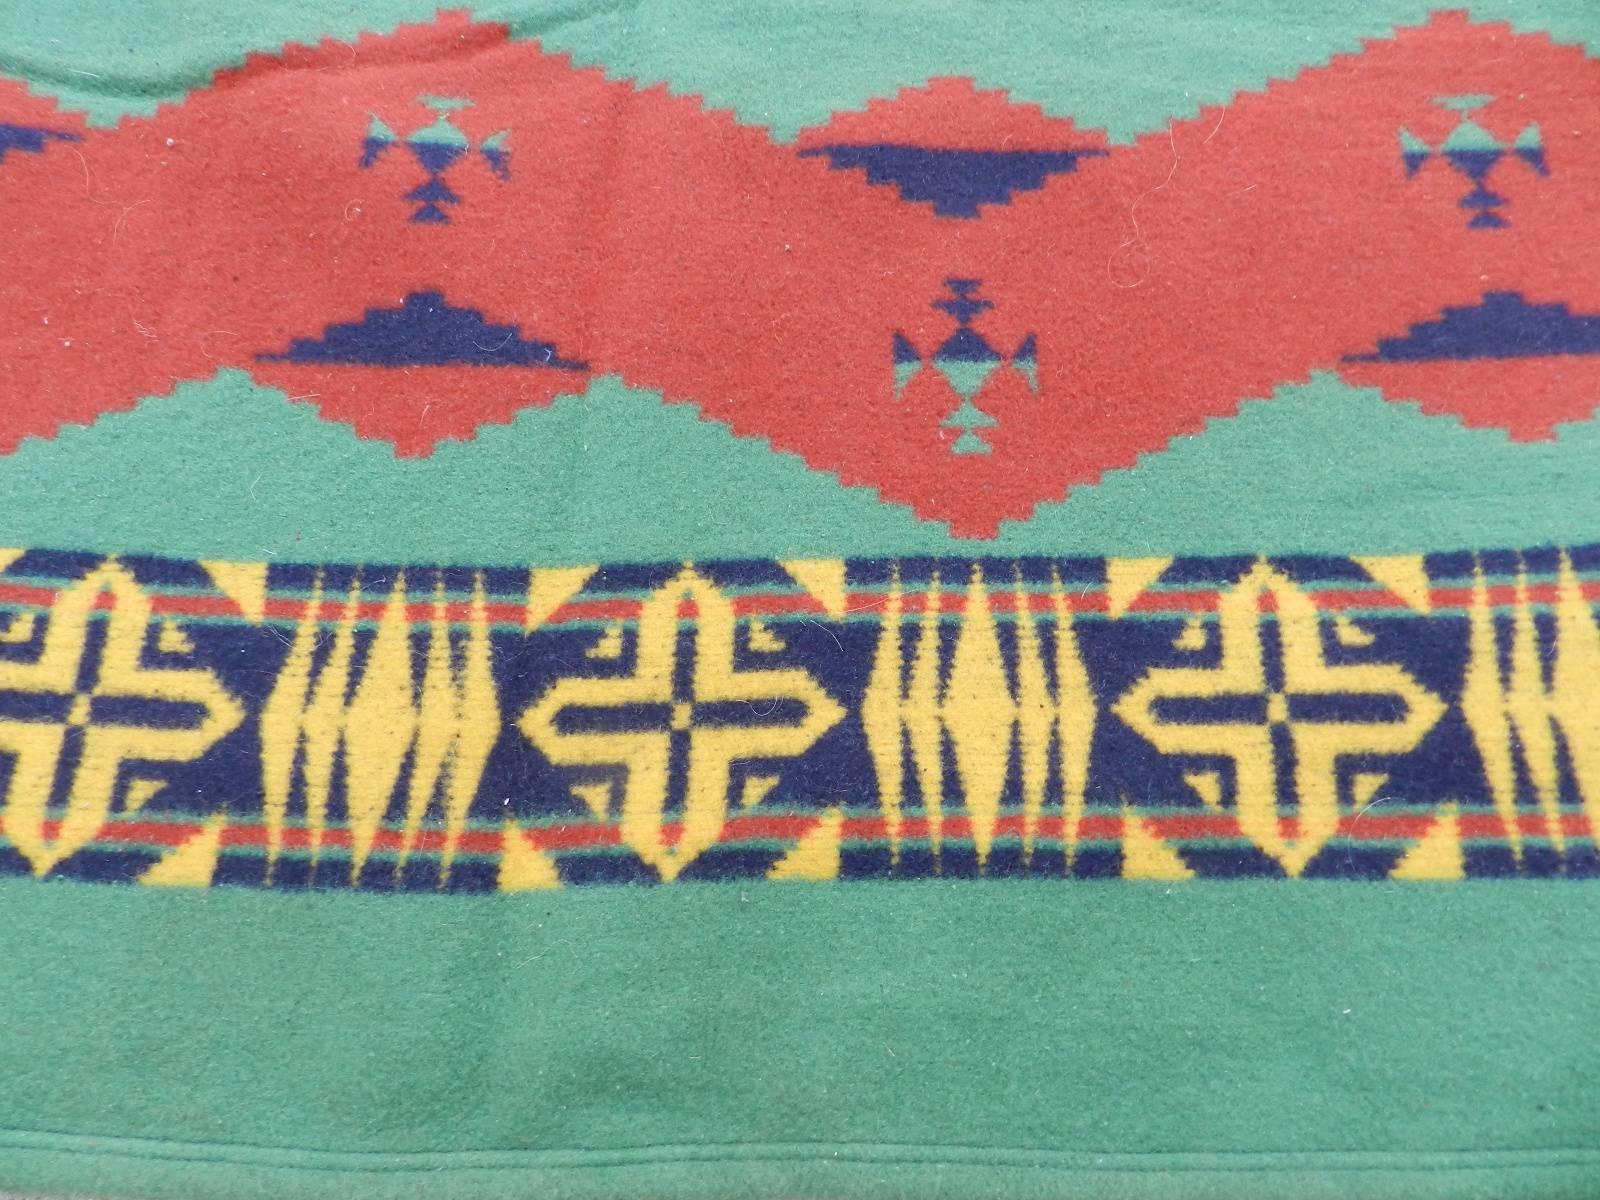 This vintage cotton camp blanket is made by the Beacon Blanket Company in the 1930s. Great over the bed or where ever.